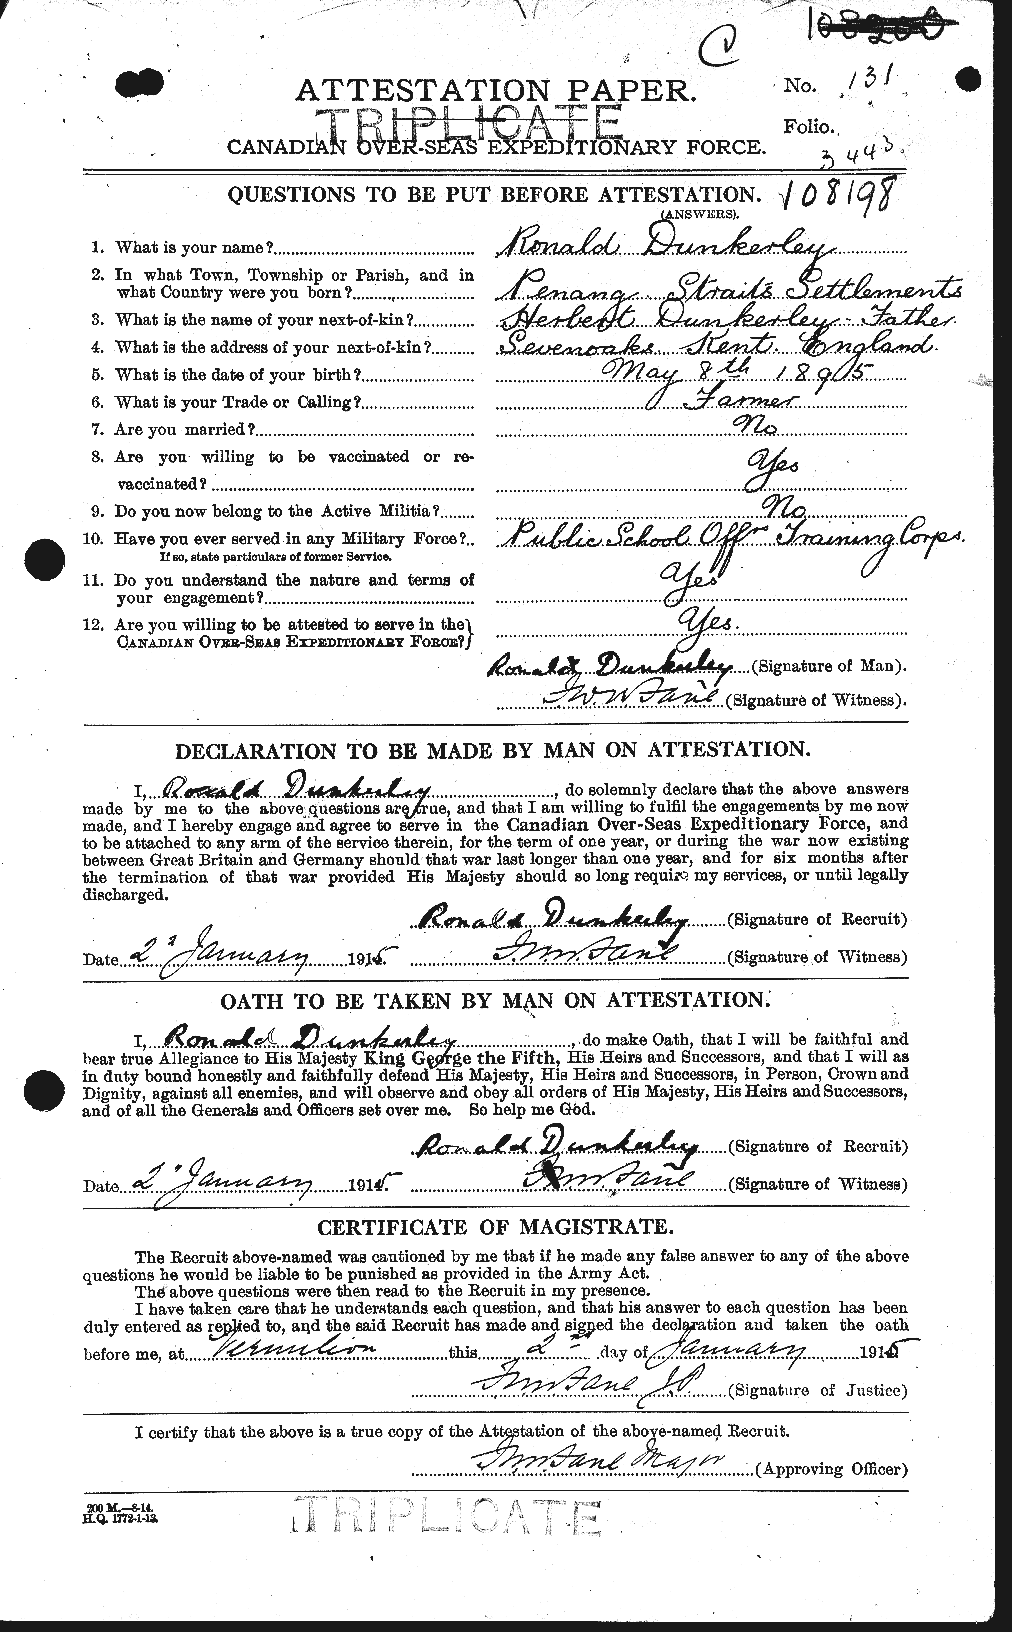 Personnel Records of the First World War - CEF 303640a